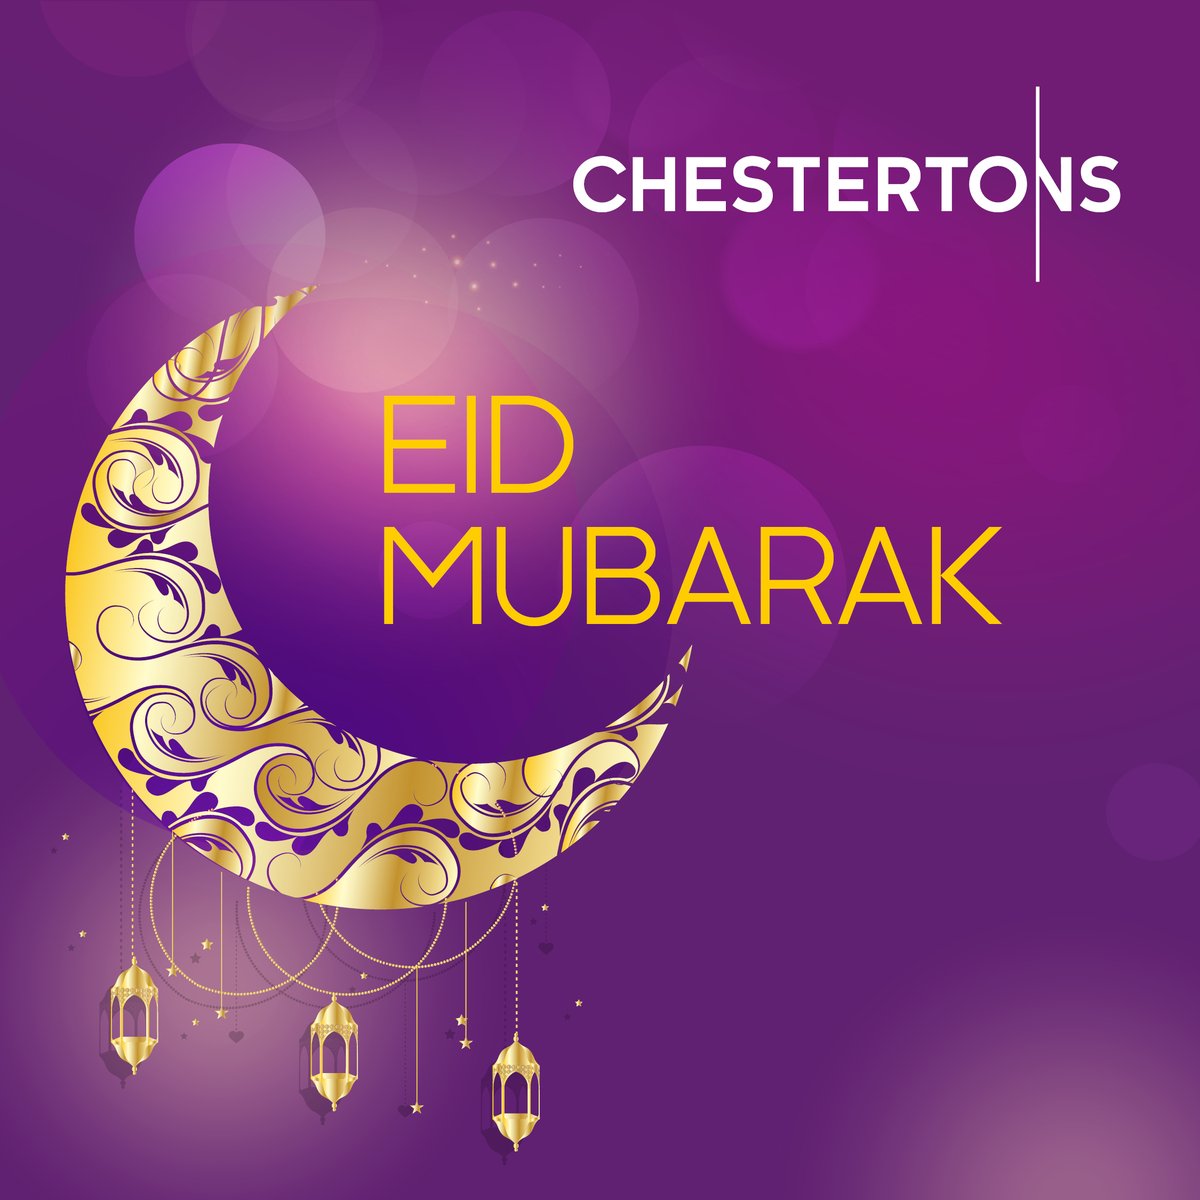 Wishing you and your loved ones a blessed Eid al-Fitr filled with peace, prosperity, happiness and good health 🌙✨ #Chestertons #EidMubarak #EidAlFitr #EstateAgents #Property